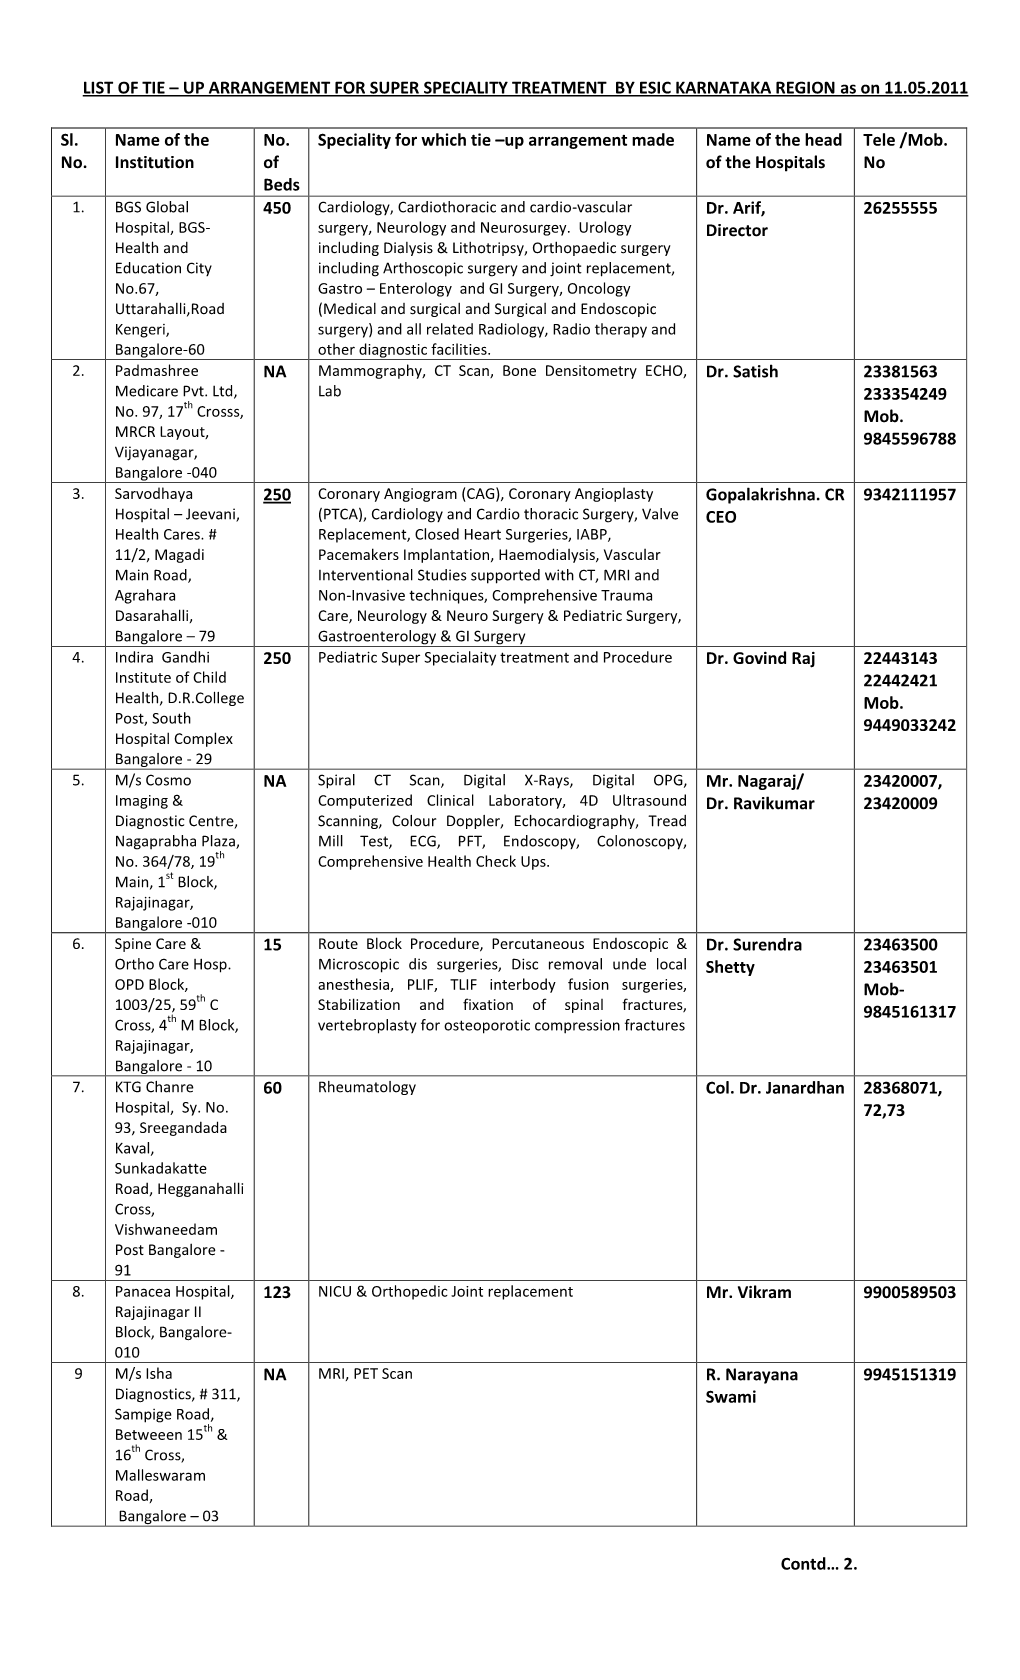 LIST of TIE – up ARRANGEMENT for SUPER SPECIALITY TREATMENT by ESIC KARNATAKA REGION As on 11.05.2011